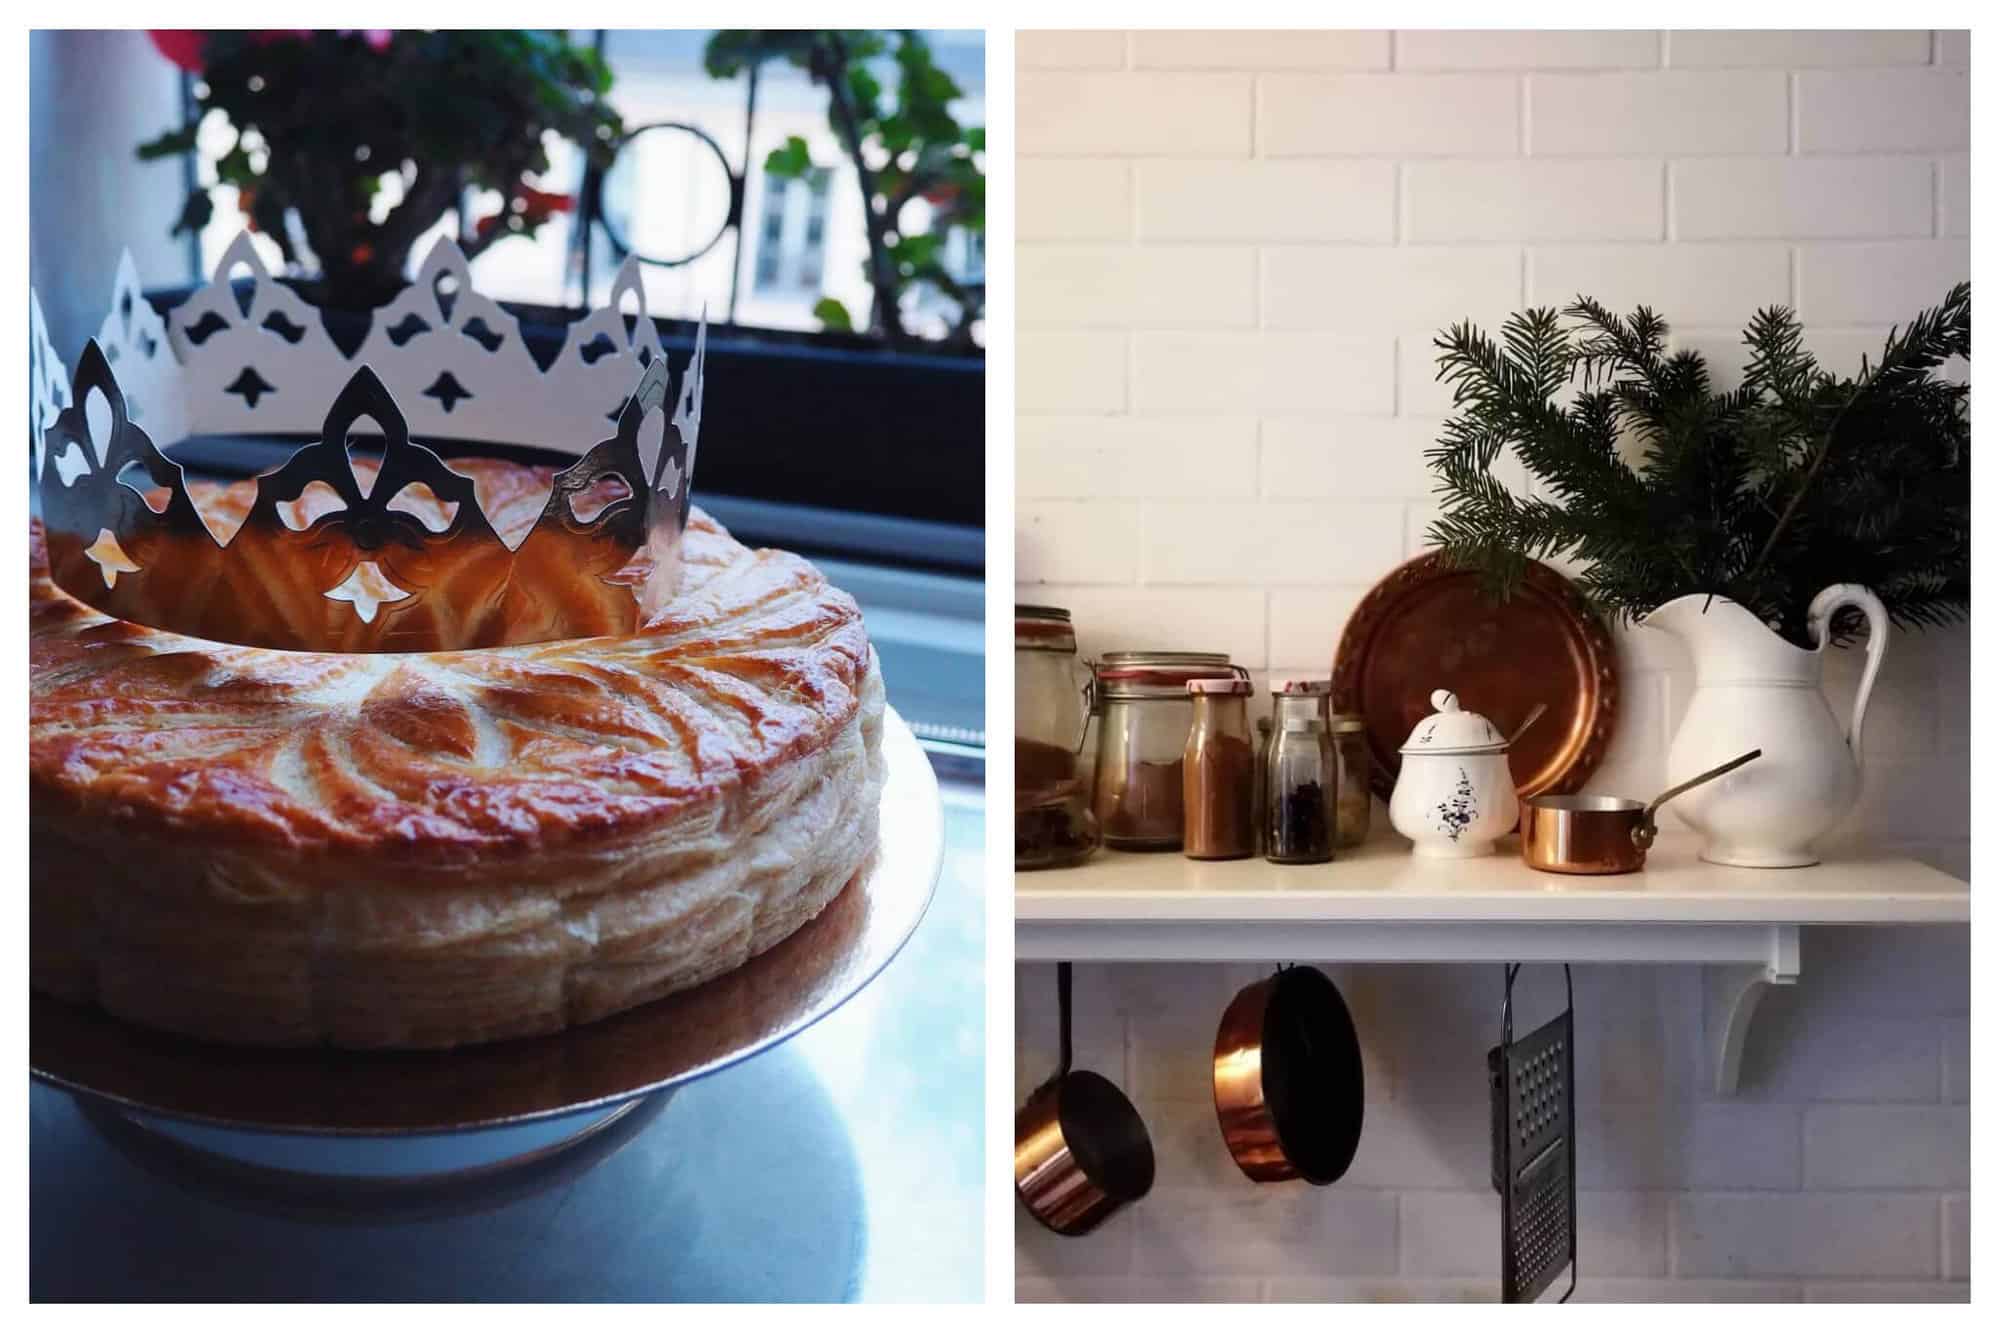 Left: a Galette de Rois cake on a gold platter with a gold crown on top of it. Some greenery on a window can be seen in the background. Right: a shelf in a French kitchen. The wall is covered with white subway tiles. There are jars with spices, copper pans, and a large white water jug filled with pine branches on the shelf. There are copper pans and a silver cheese grater hanging from the shelf. 